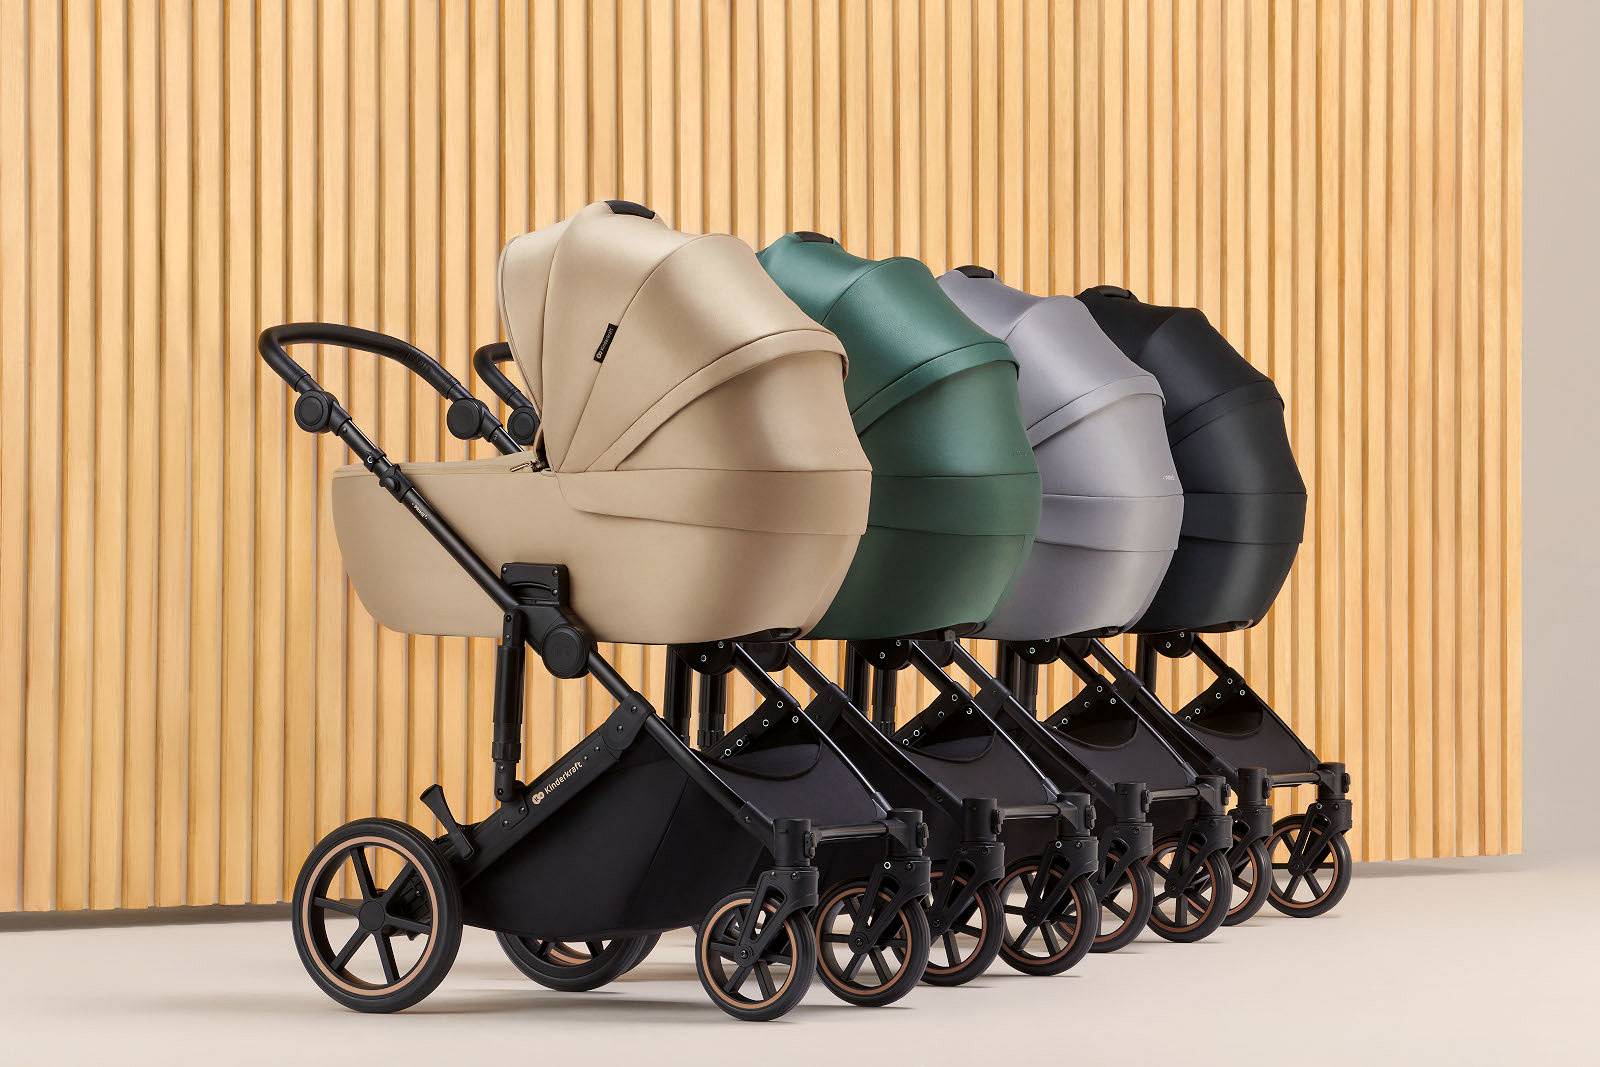 It’s a stylish pushchair for special tasks